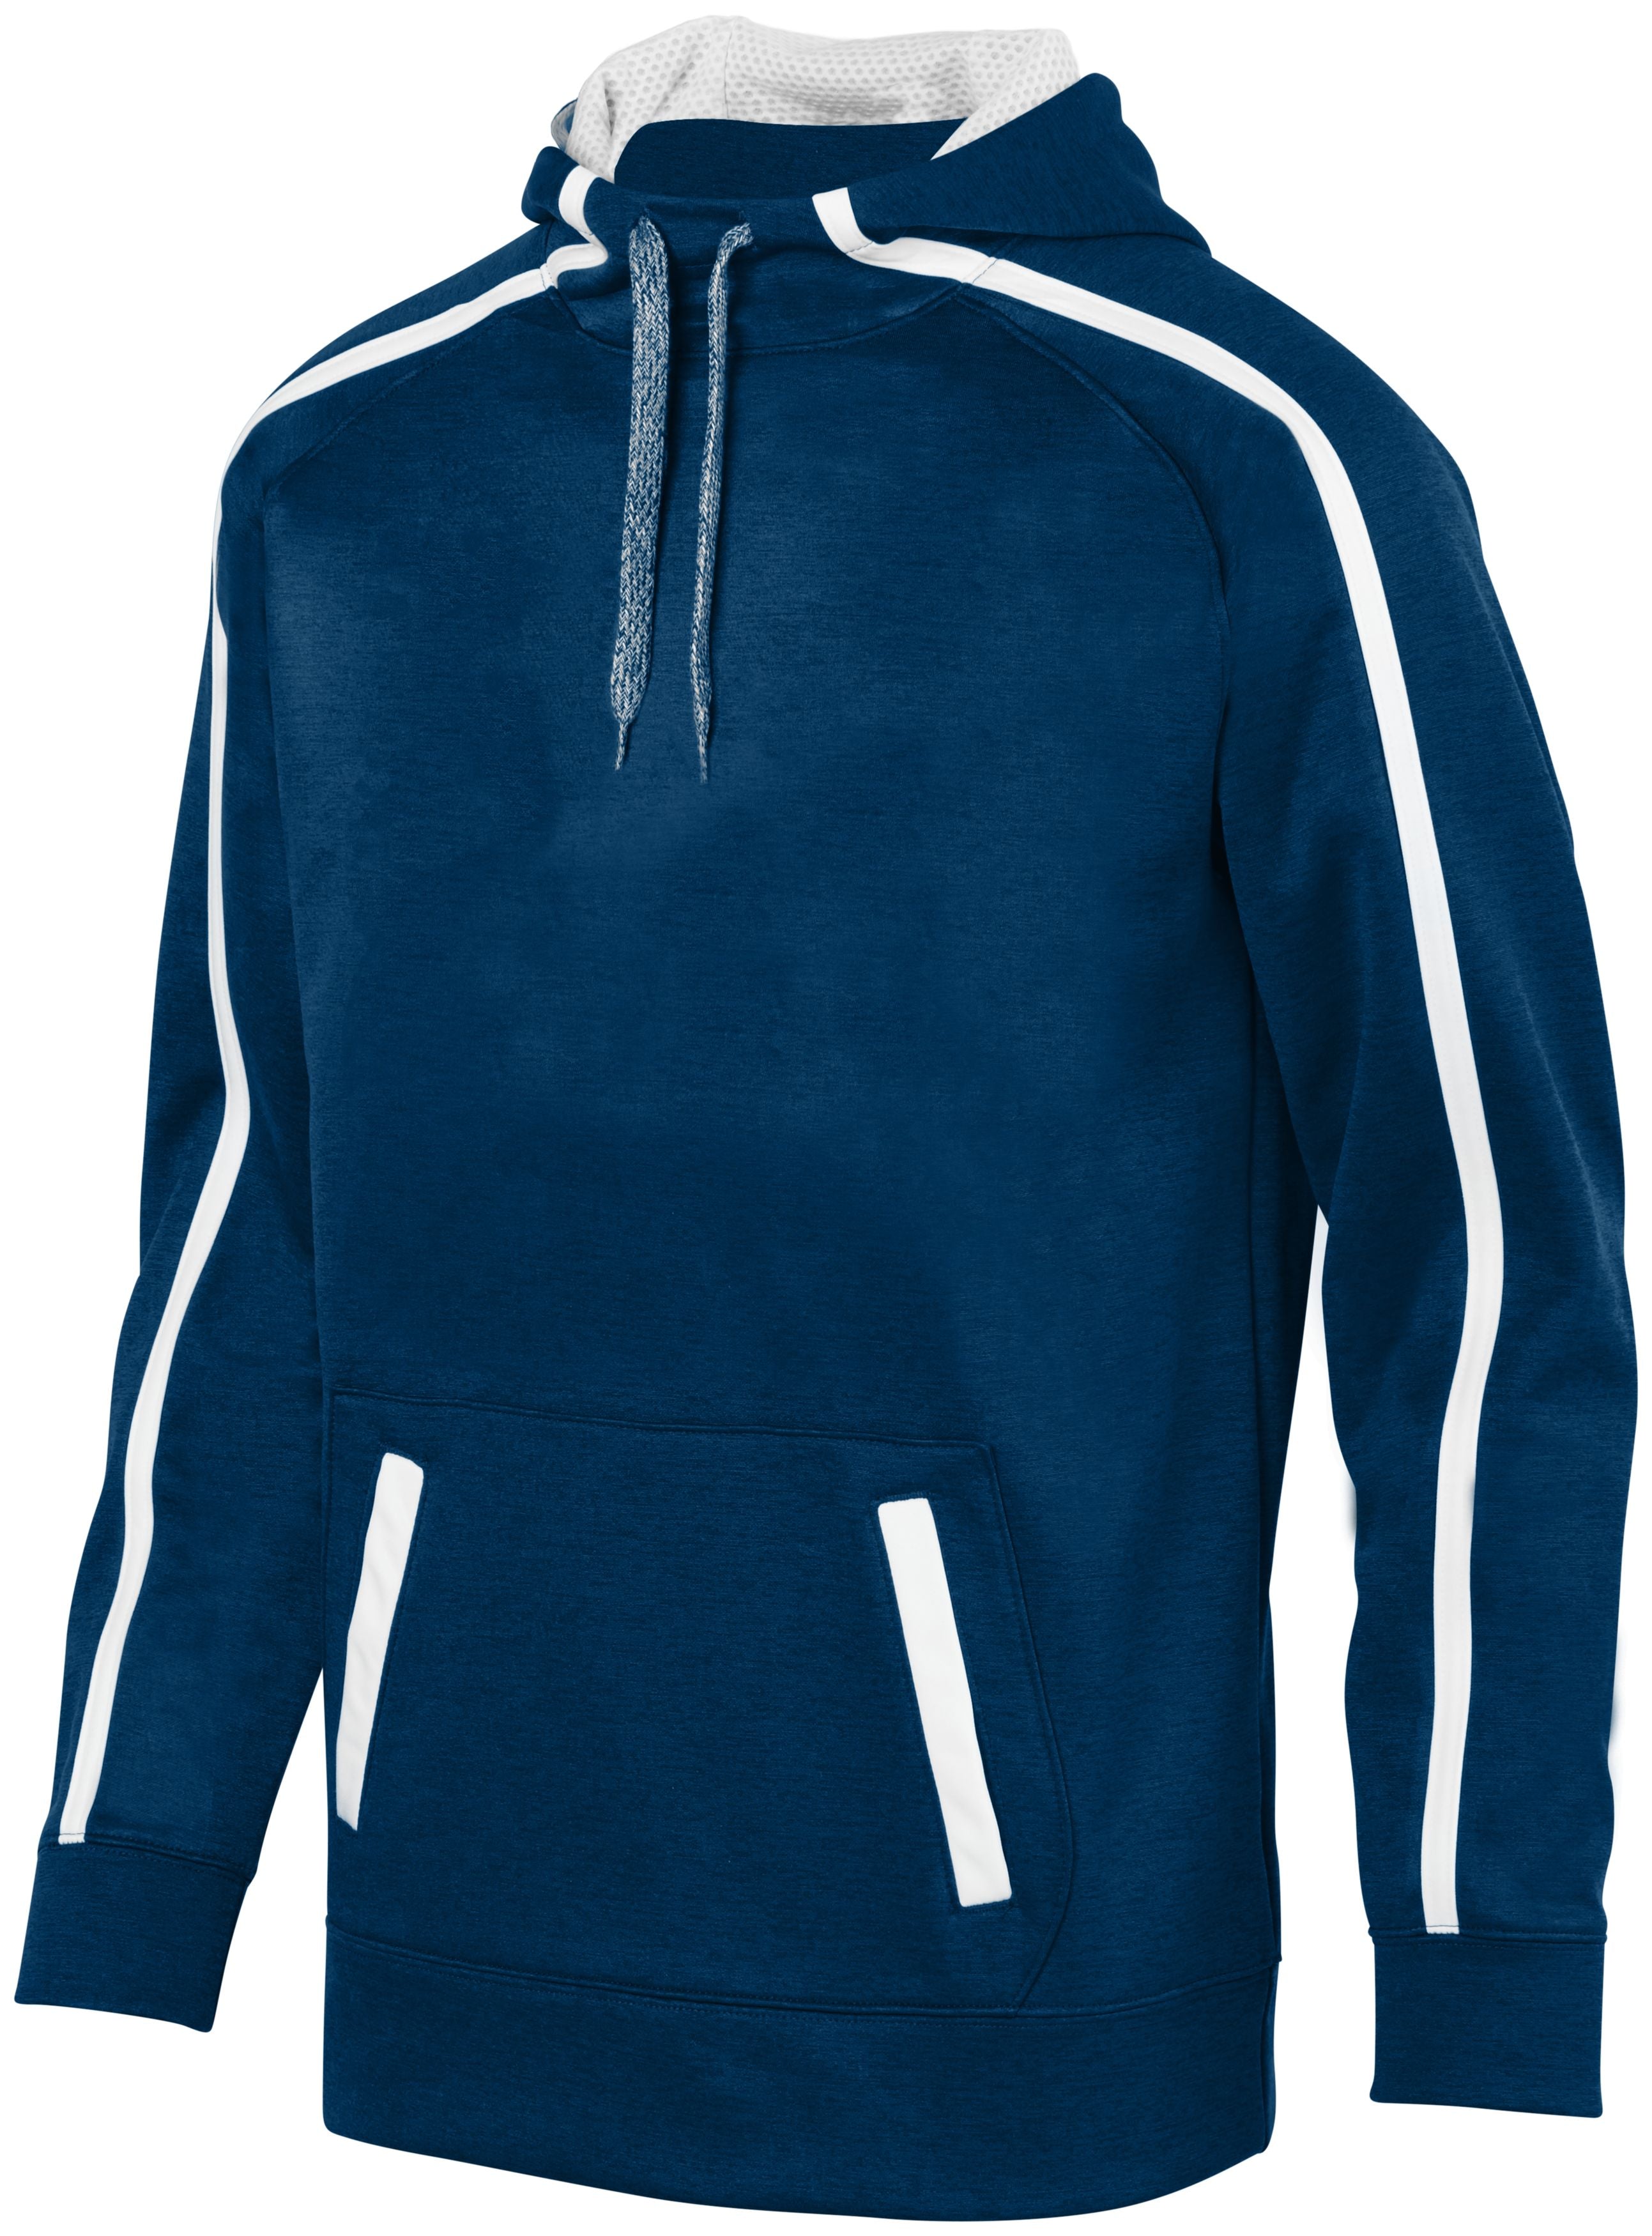 Augusta Sportswear Youth Stoked Tonal Heather Hoodie in Navy/White  -Part of the Youth, Augusta-Products, Shirts, Tonal-Fleece-Collection product lines at KanaleyCreations.com